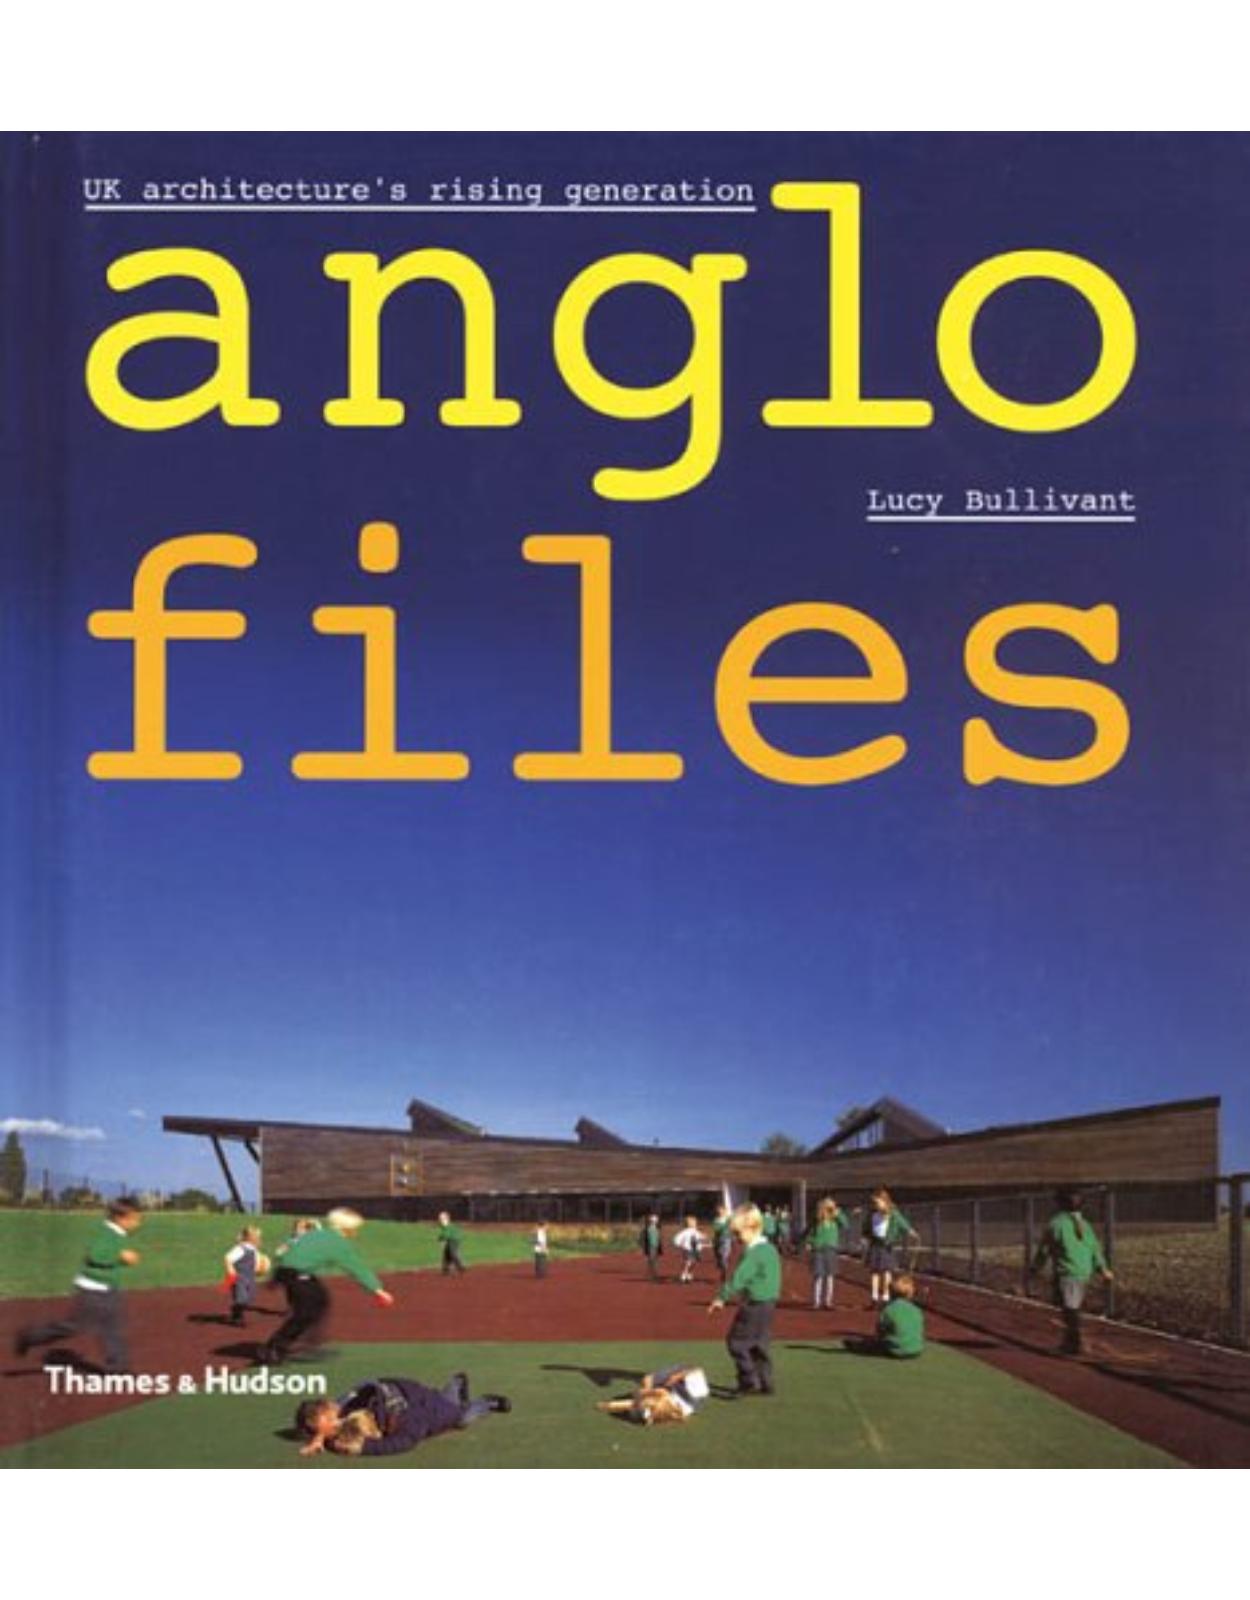 Anglo Files: UK Architecture's Rising Generation